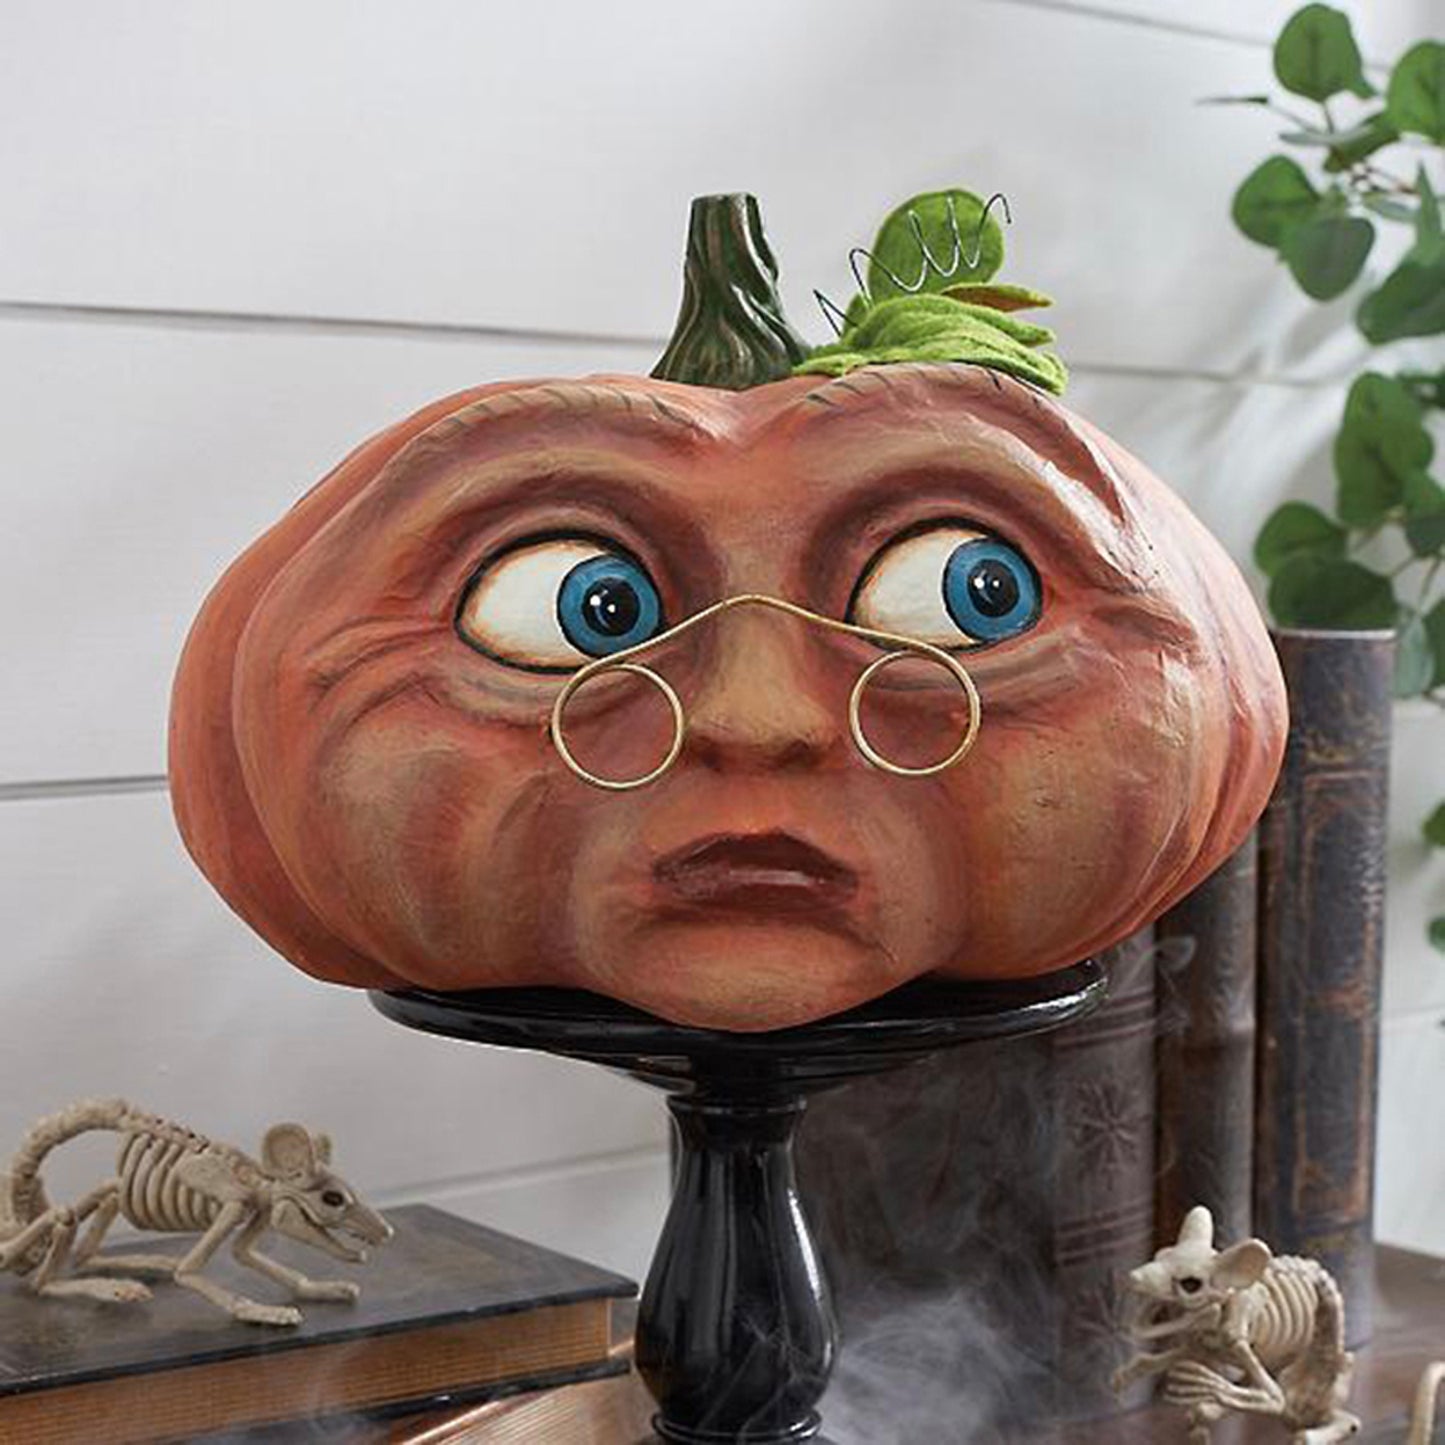 Fake Scary Pumpkins for Halloween